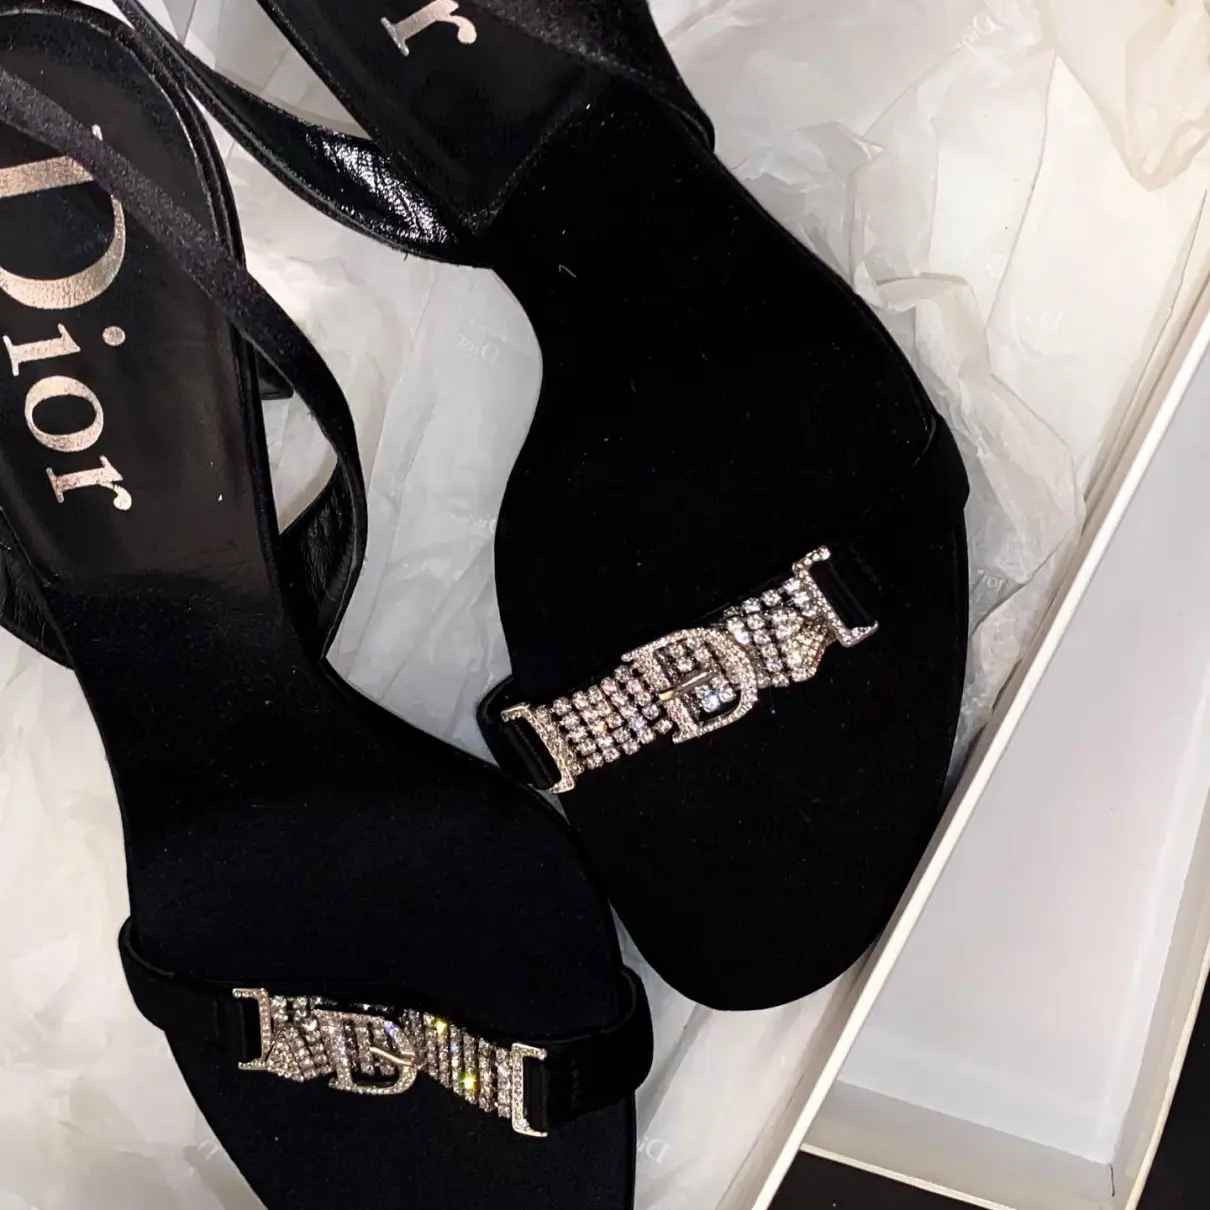 Leather sandals Dior